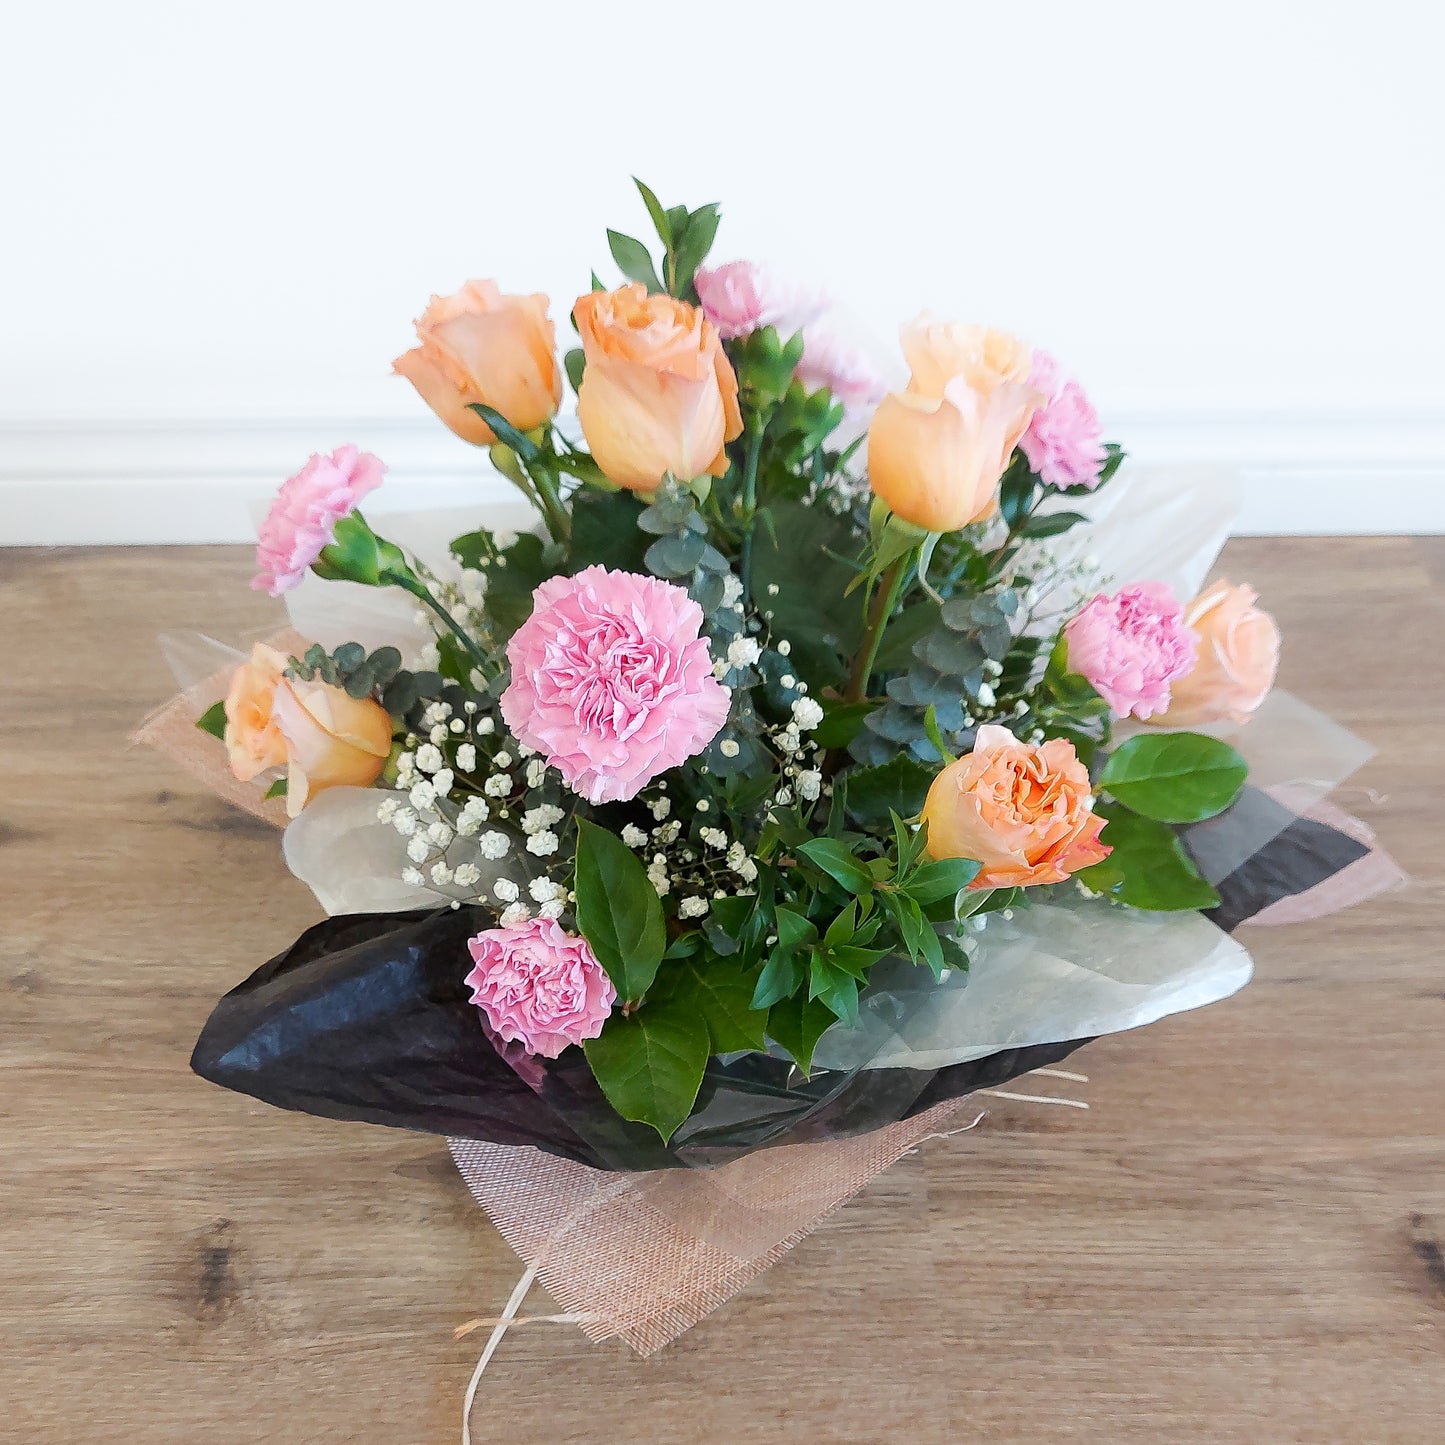 roses and carnations arranged in a box